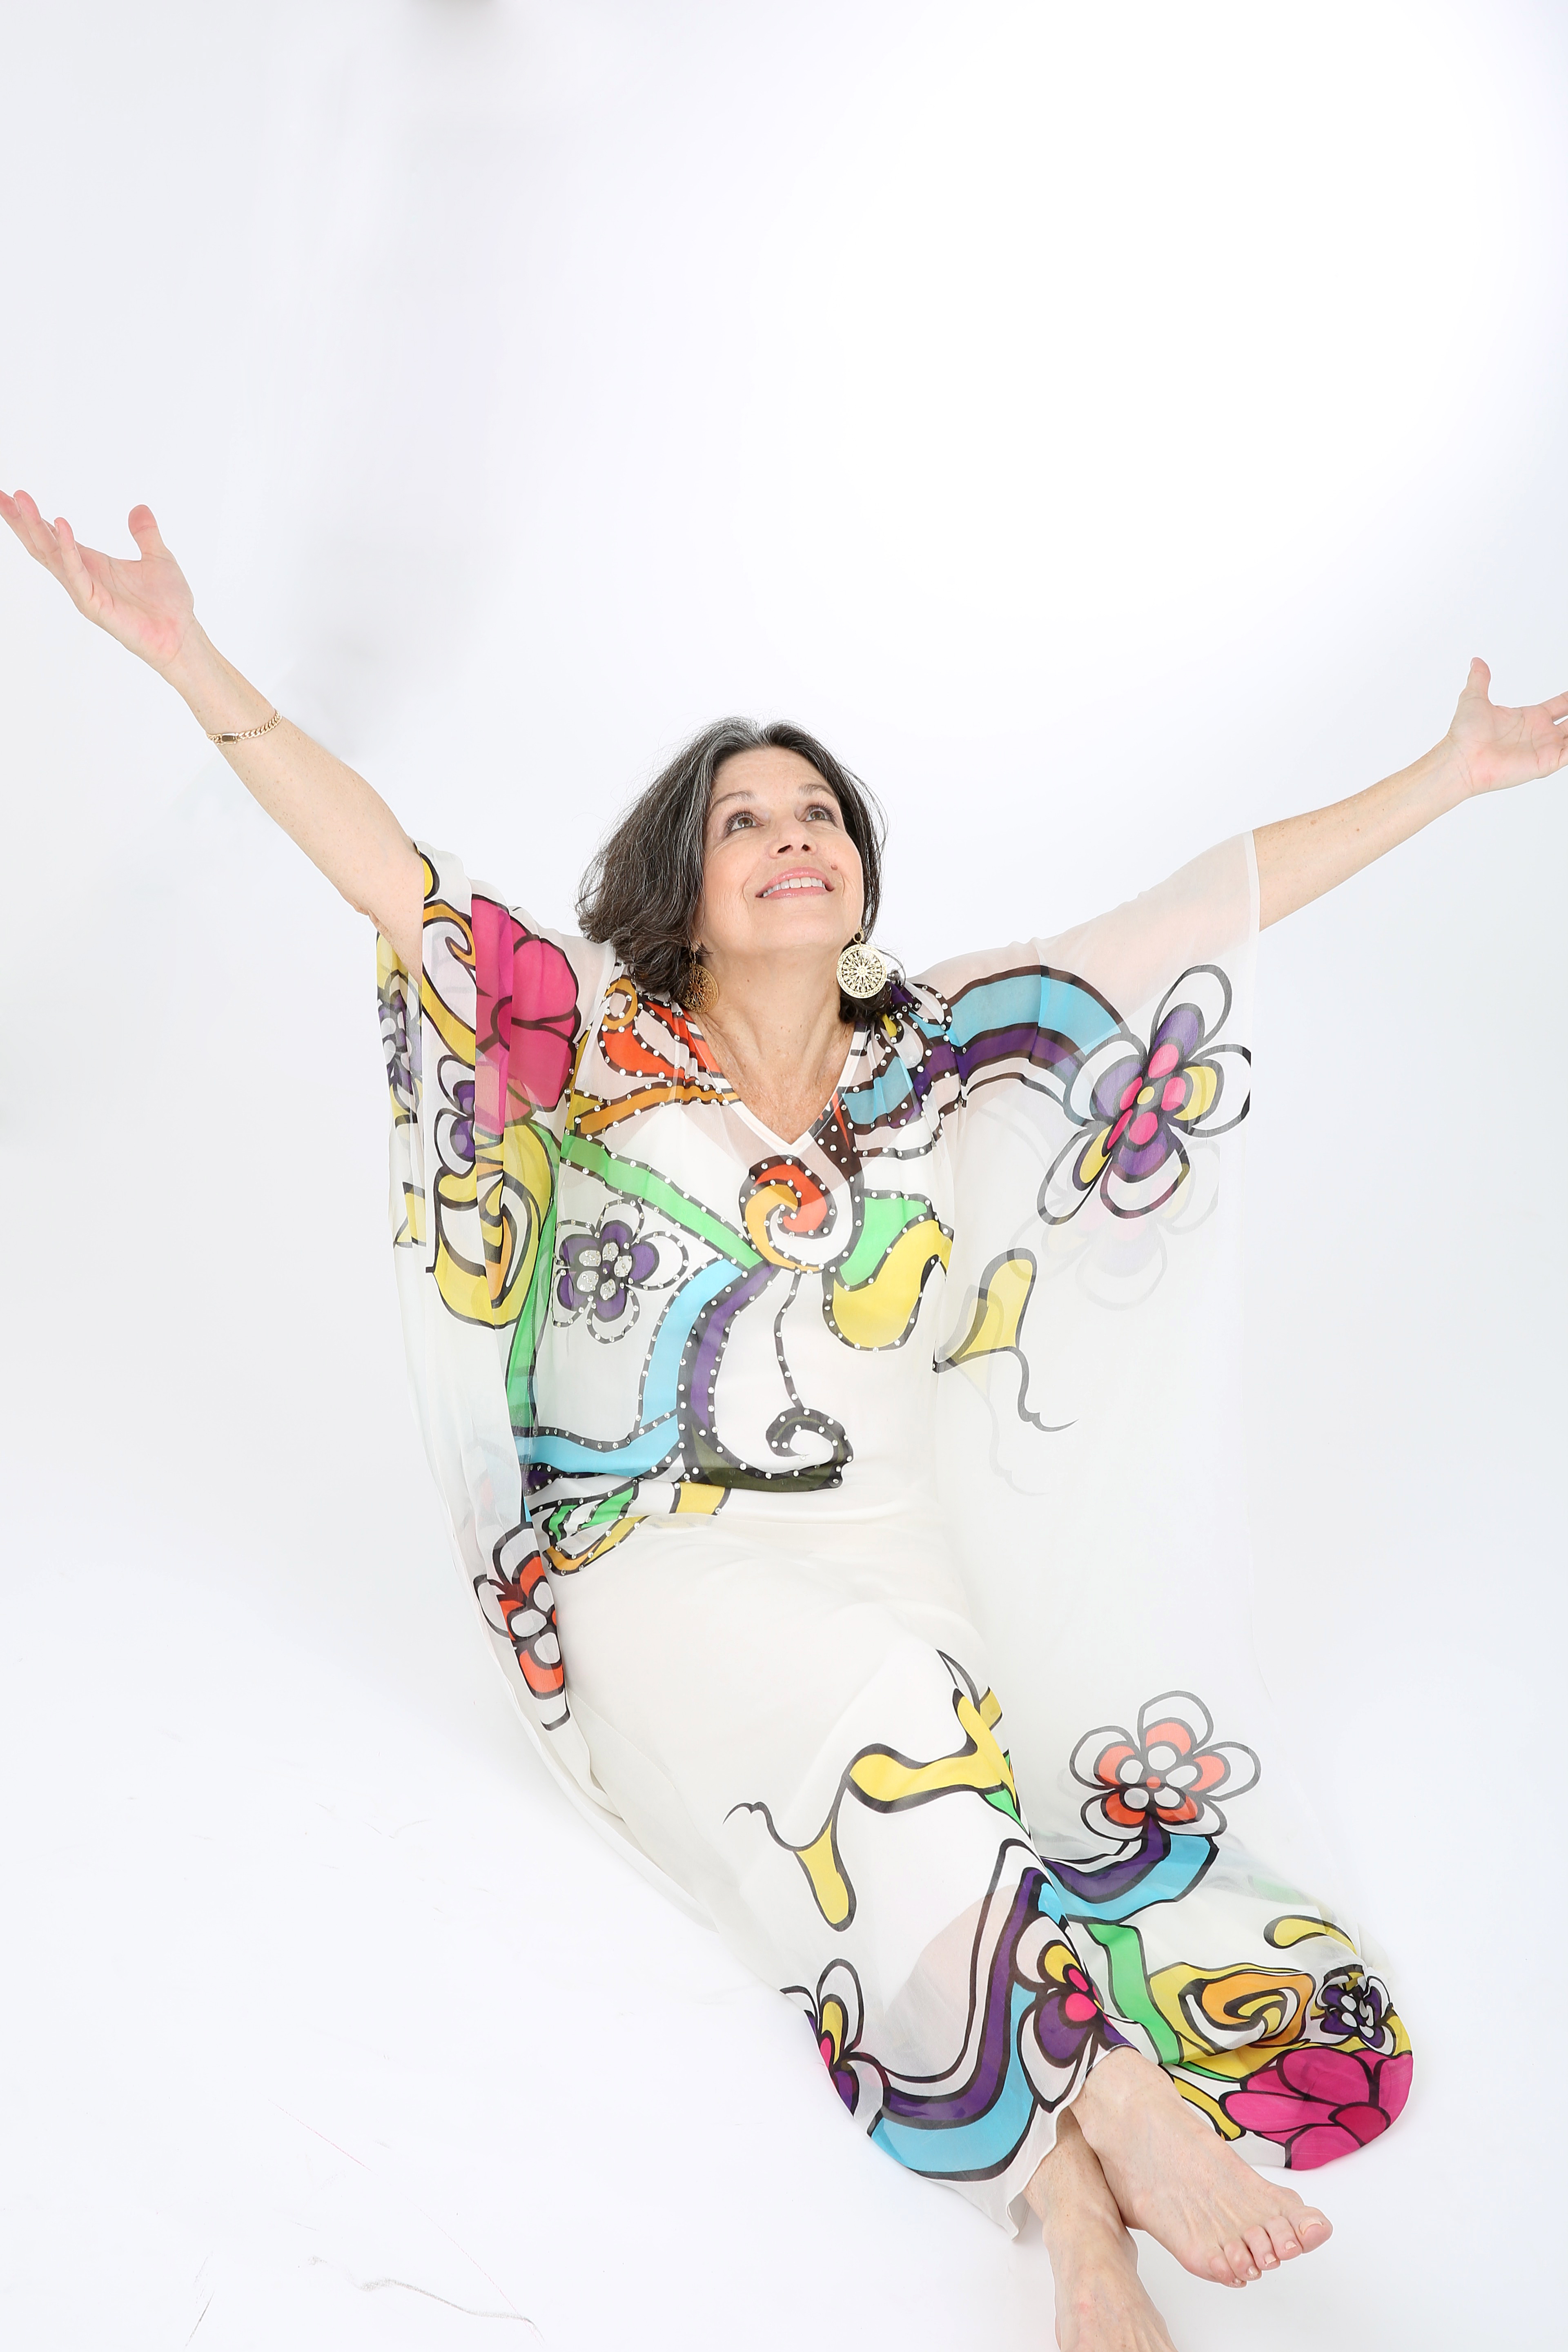 Susana Behar Levy is wearing a colorful dress against a white background and she has her arms thrown up in the air.